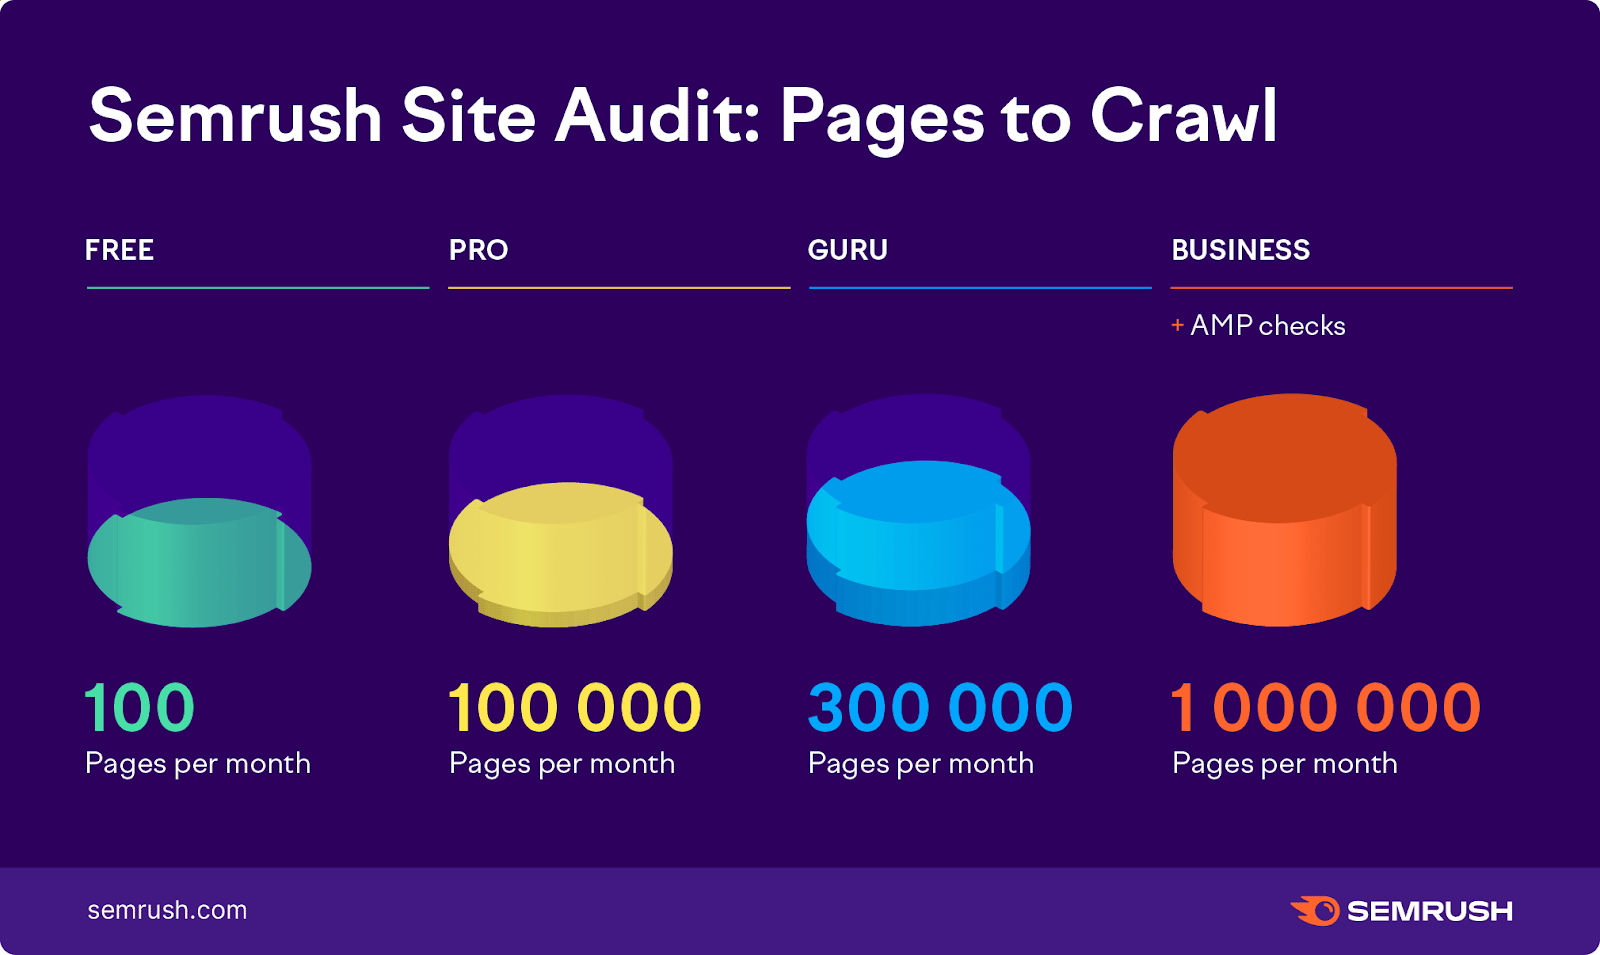 "Semrush Site Audit: Pages to Crawl" pricing plans